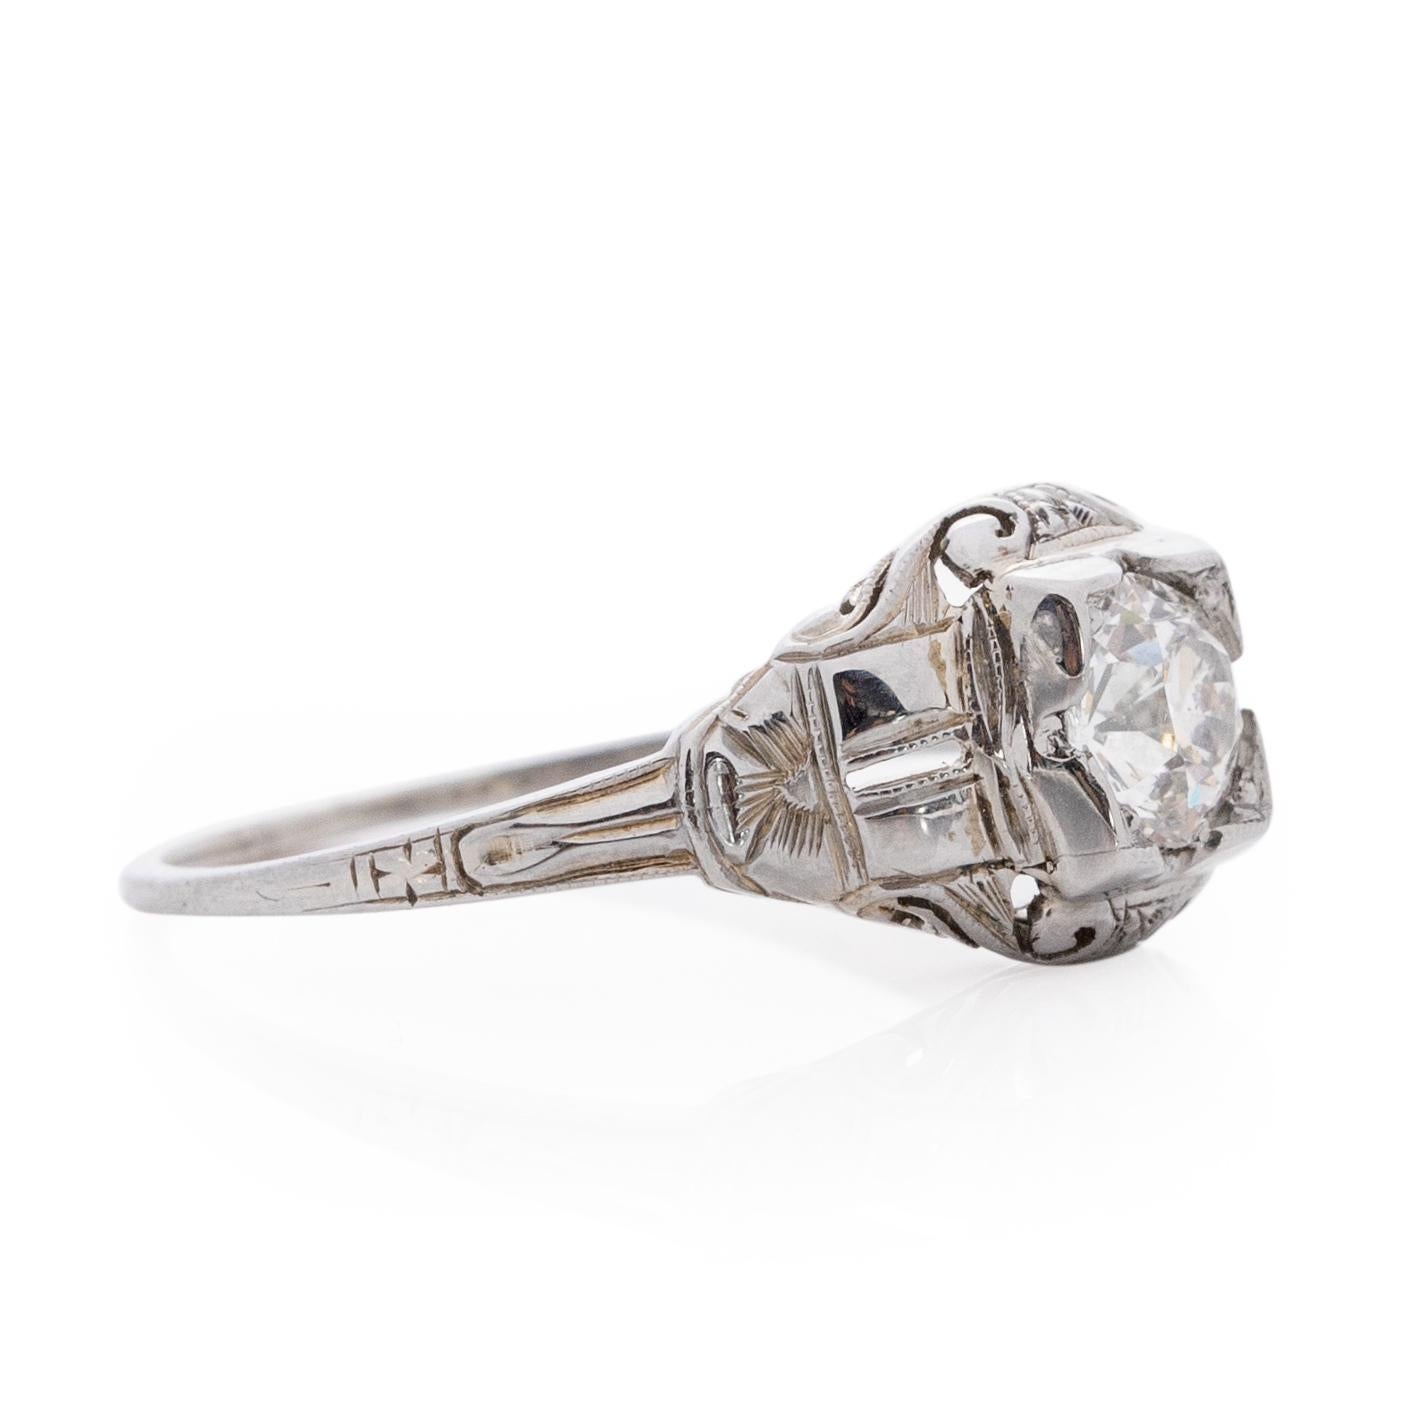 Here we have a wonderful Barth ring, in excellent condition. (Barth was a jewelry company in the 1930's) This illusion head solitaire ring has all the art deco feels. Filigree and geometric details around the gallery, and in the center a beautiful